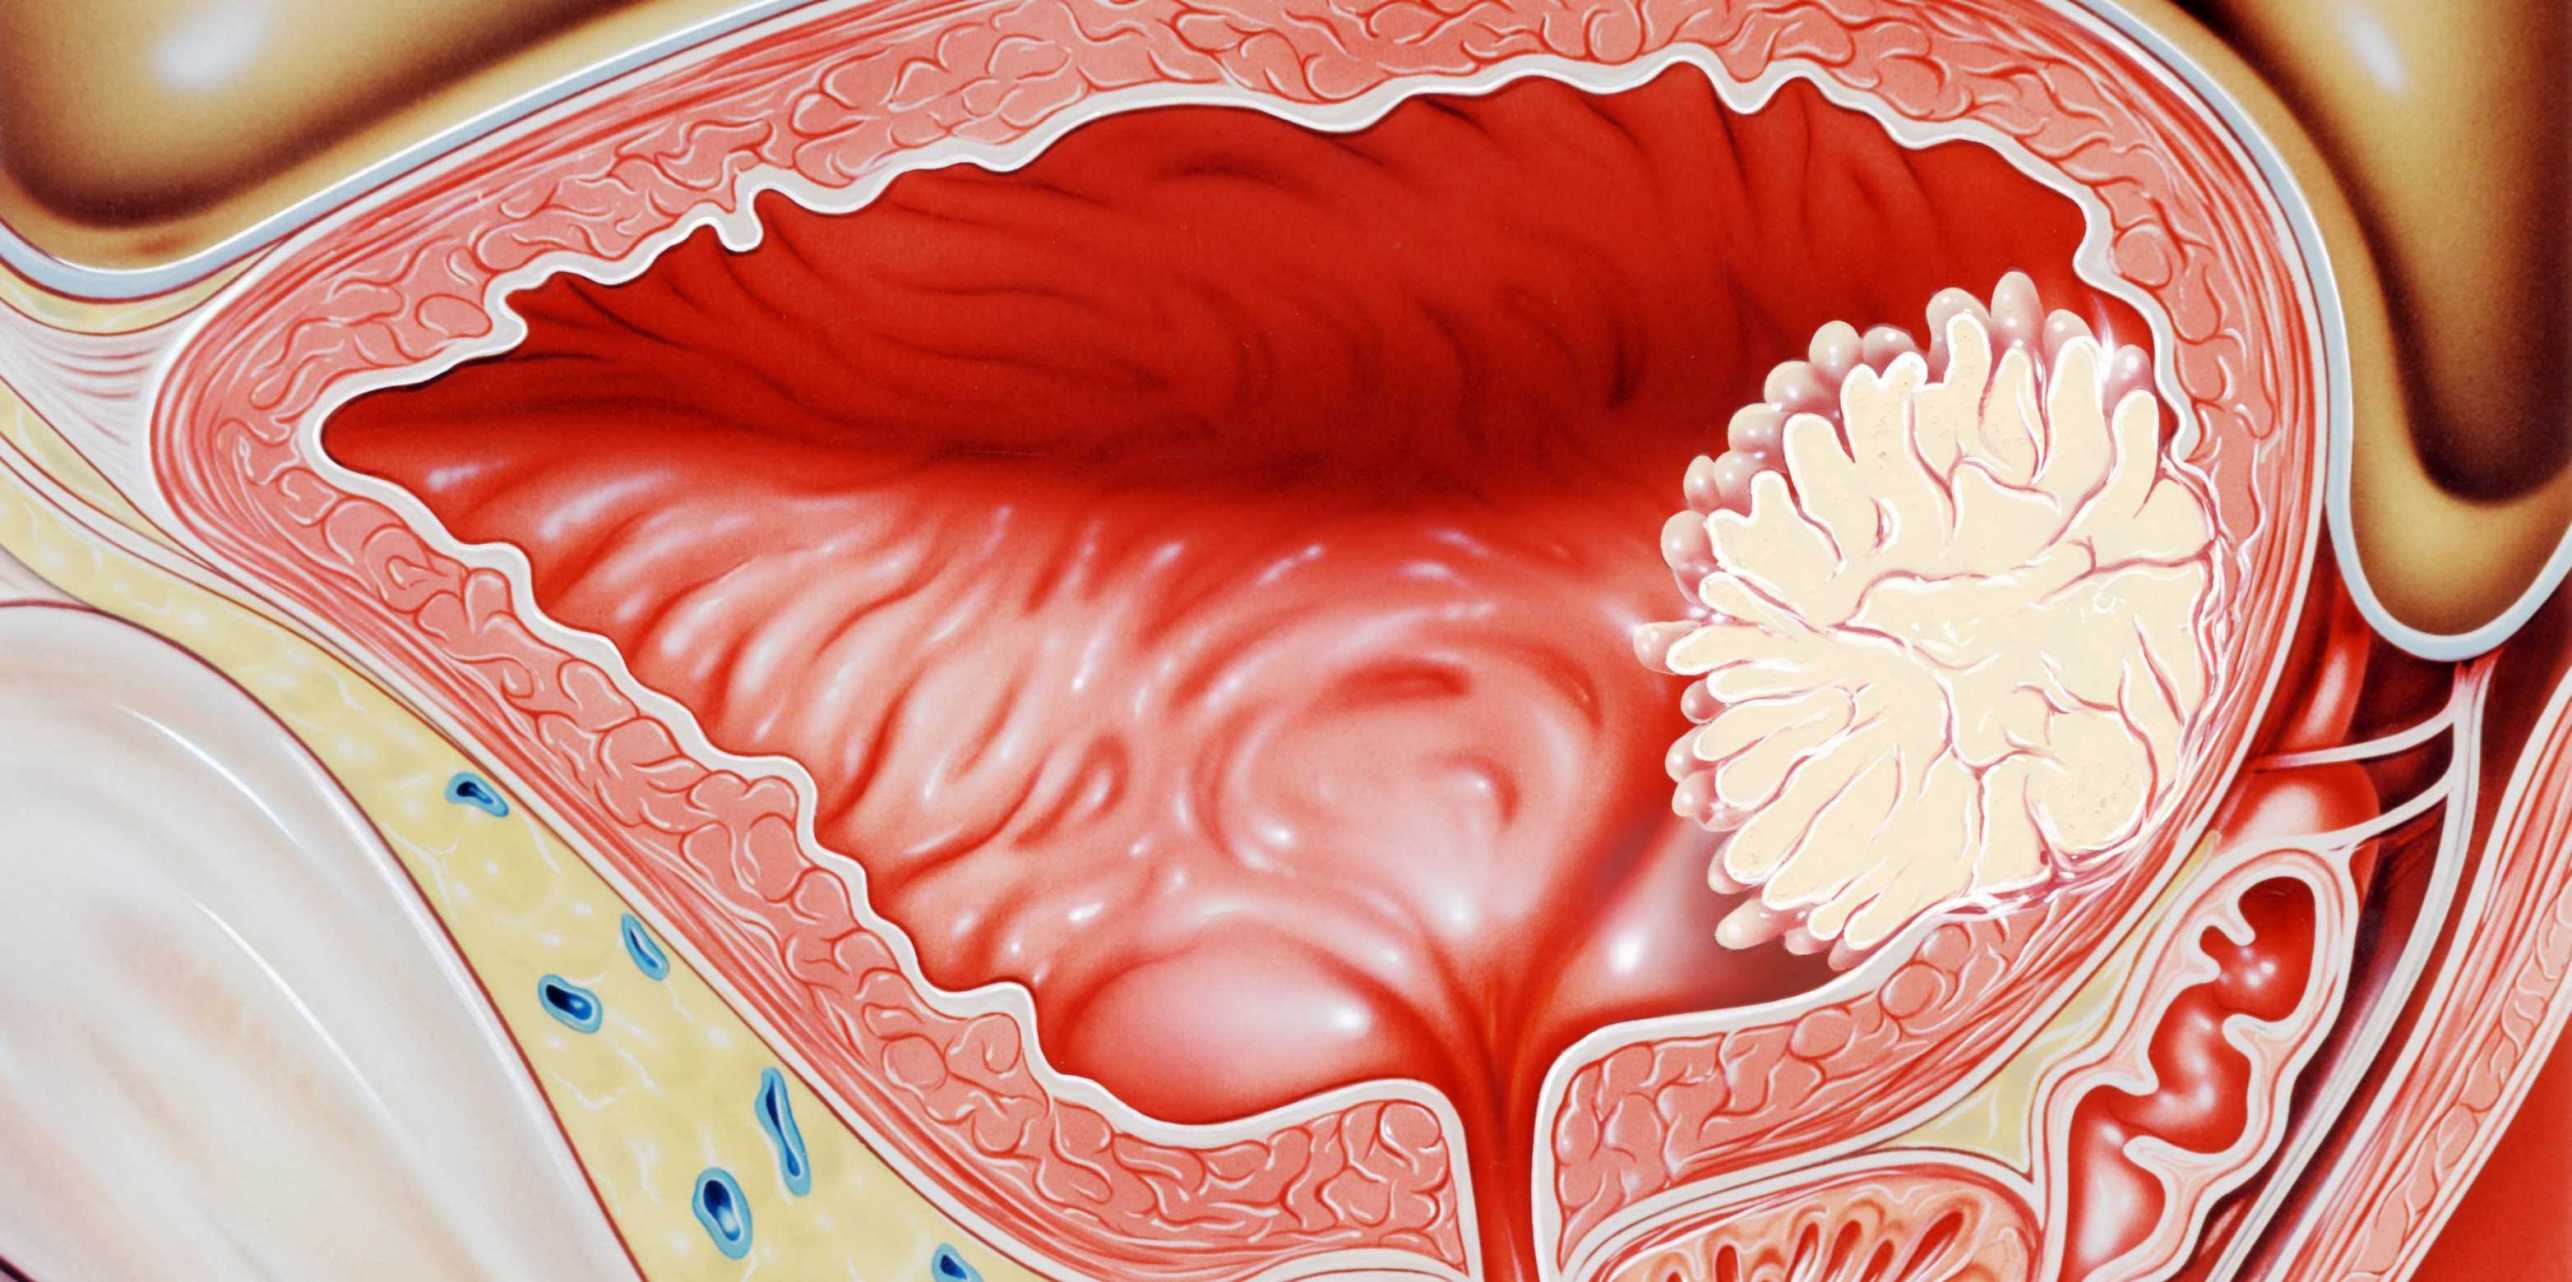 Graphic of papillary tumor, which grows from the bladder wall into the bladder cavity